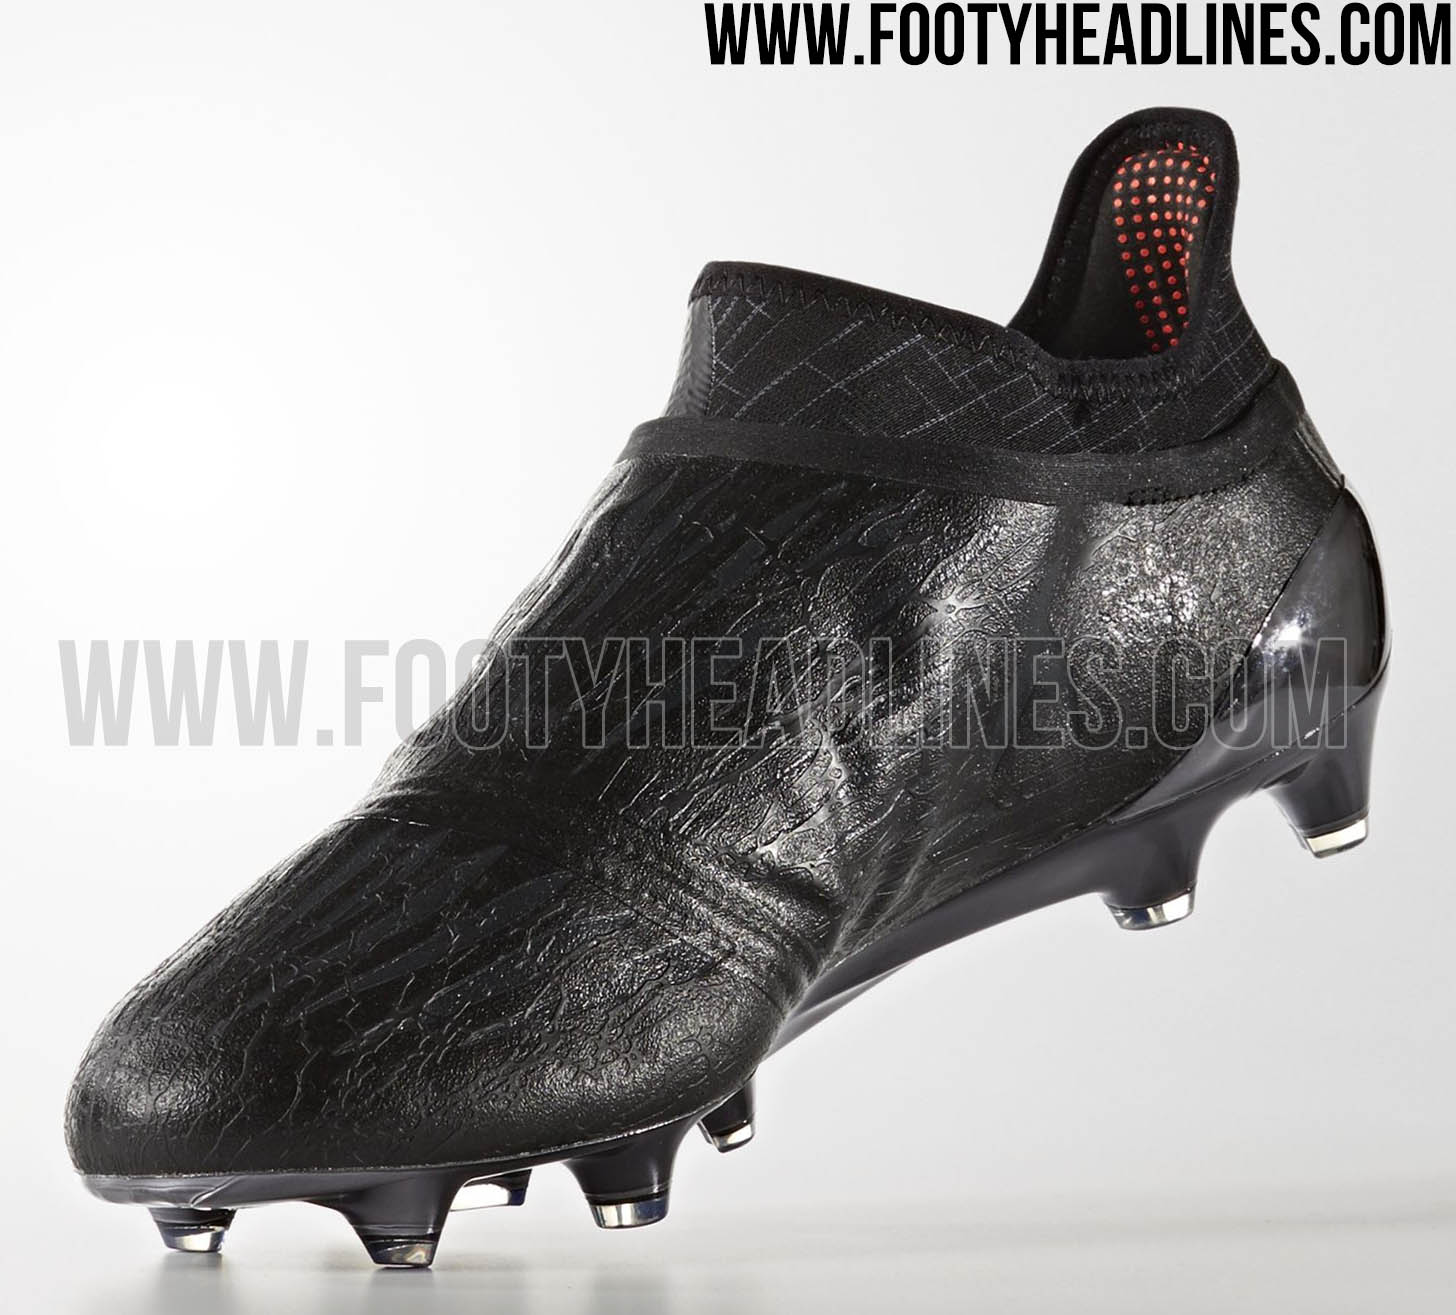 Blackout Adidas Purechaos Dark Space Pack Boots Released - Footy Headlines